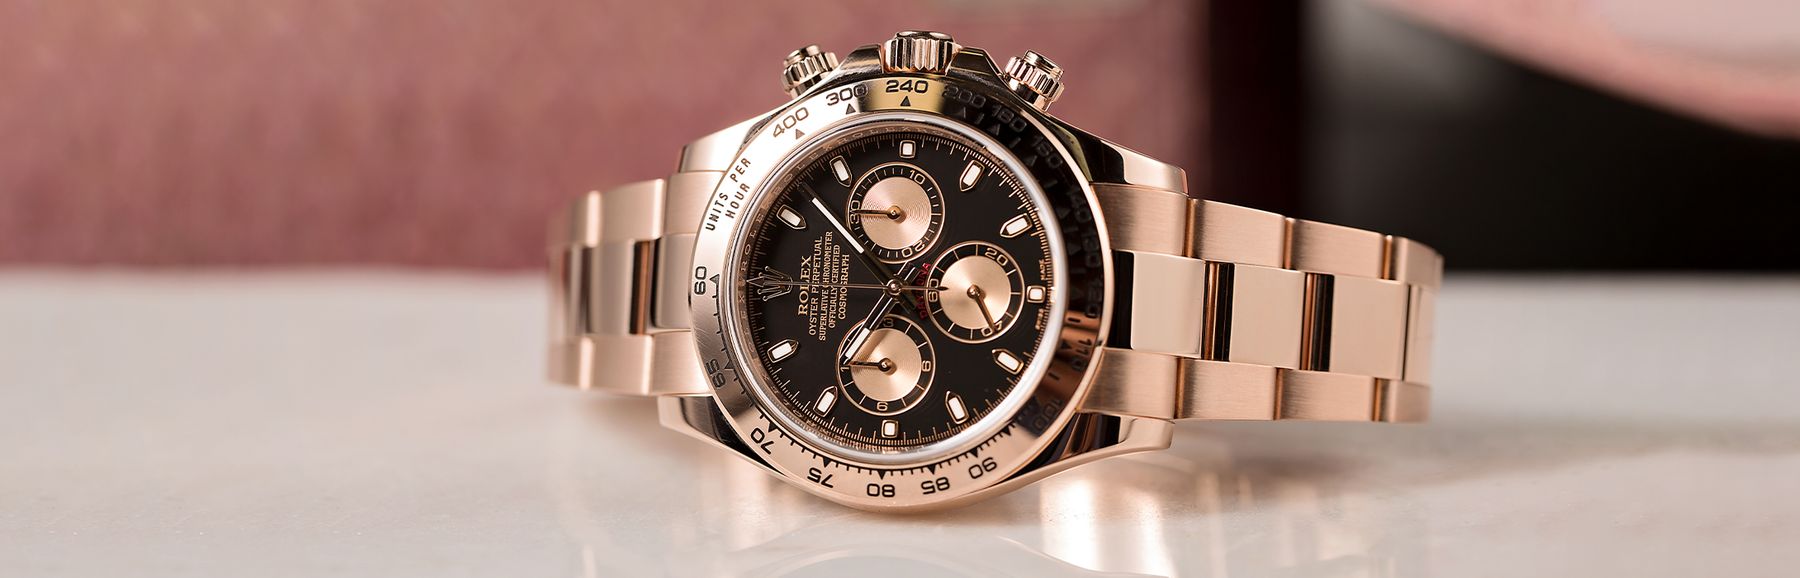 rolex oyster perpetual yacht master price